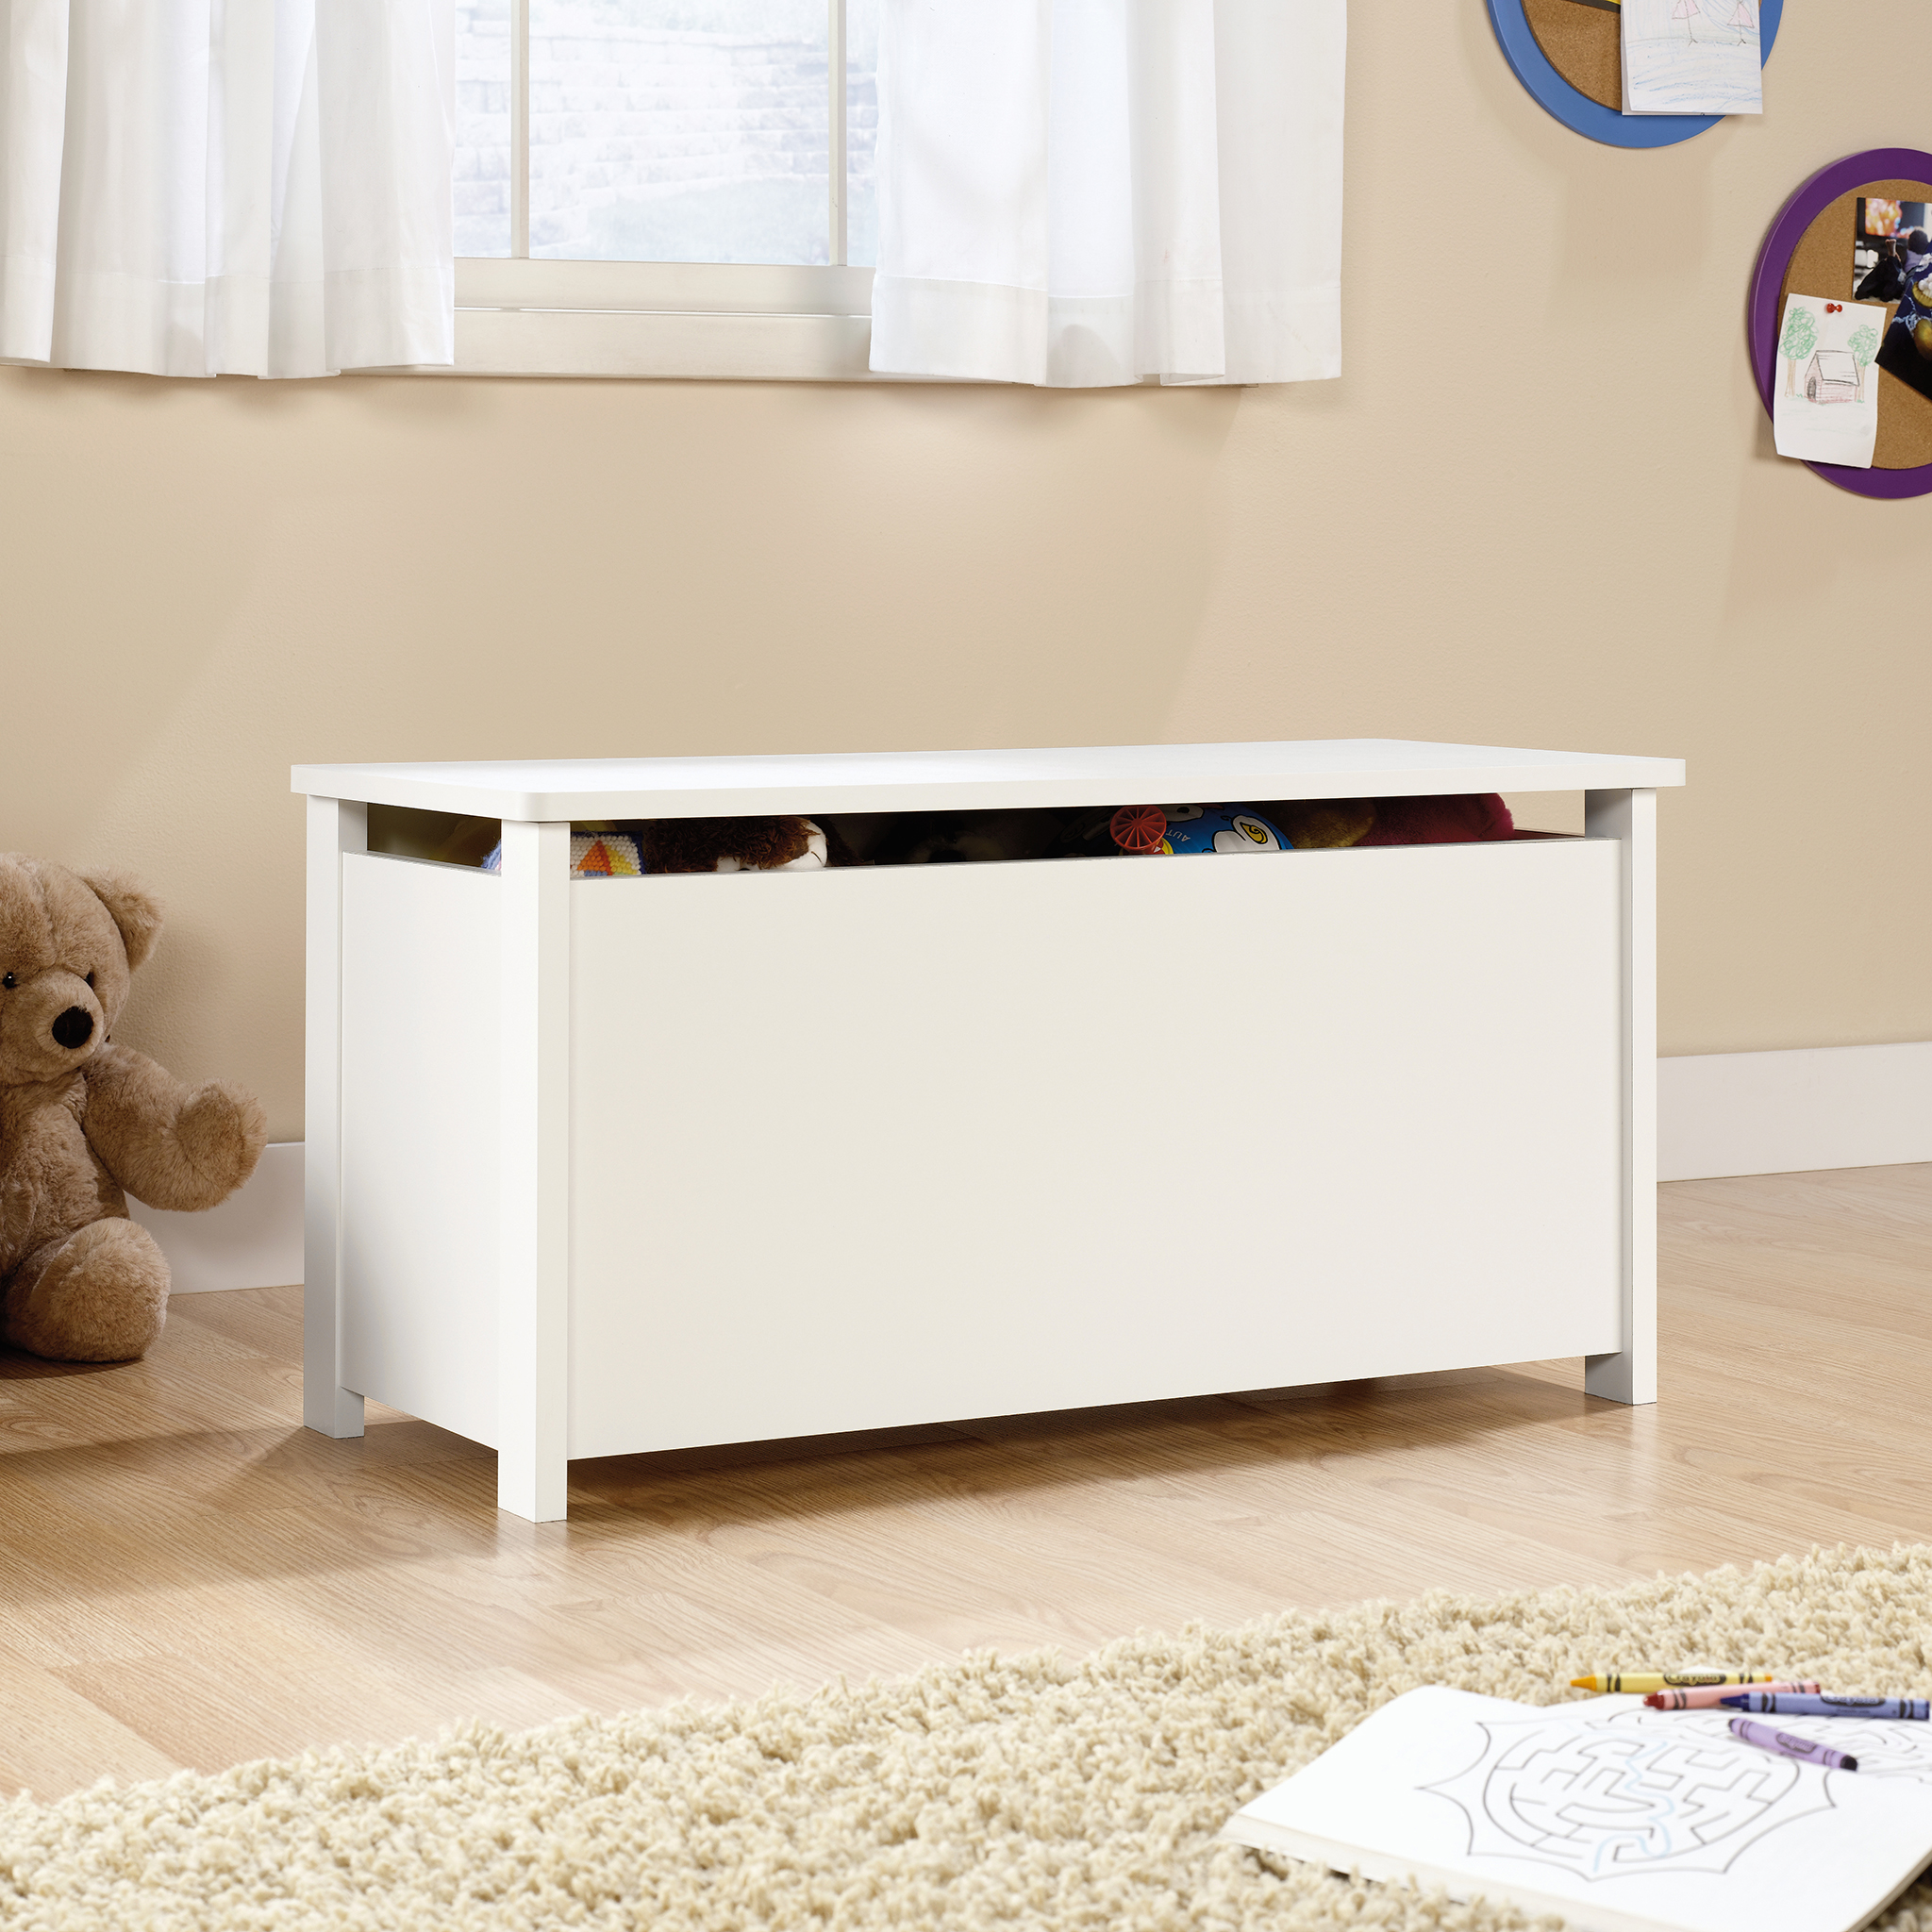 Sauder Beginnings Hinged Safety Top Wooden Toy Chest/Bench, Soft White Finish - image 1 of 9